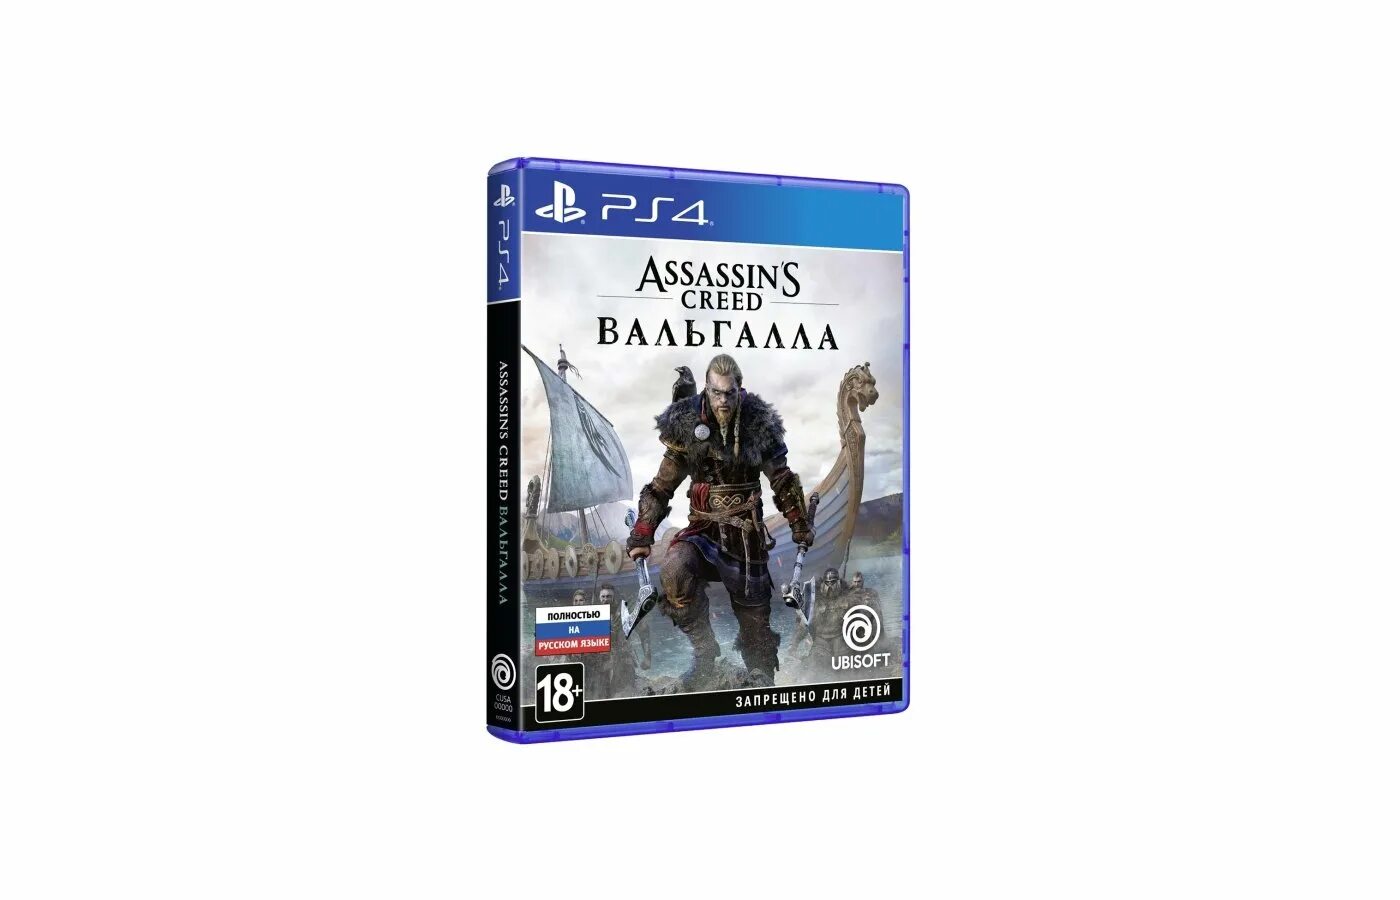 Assassin's Creed Valhalla ps4. Ассасин Крид диск на ПС 4. Ассасин Крид Вальхалла ps4. Assassin's Creed Valhalla ps4 диск.